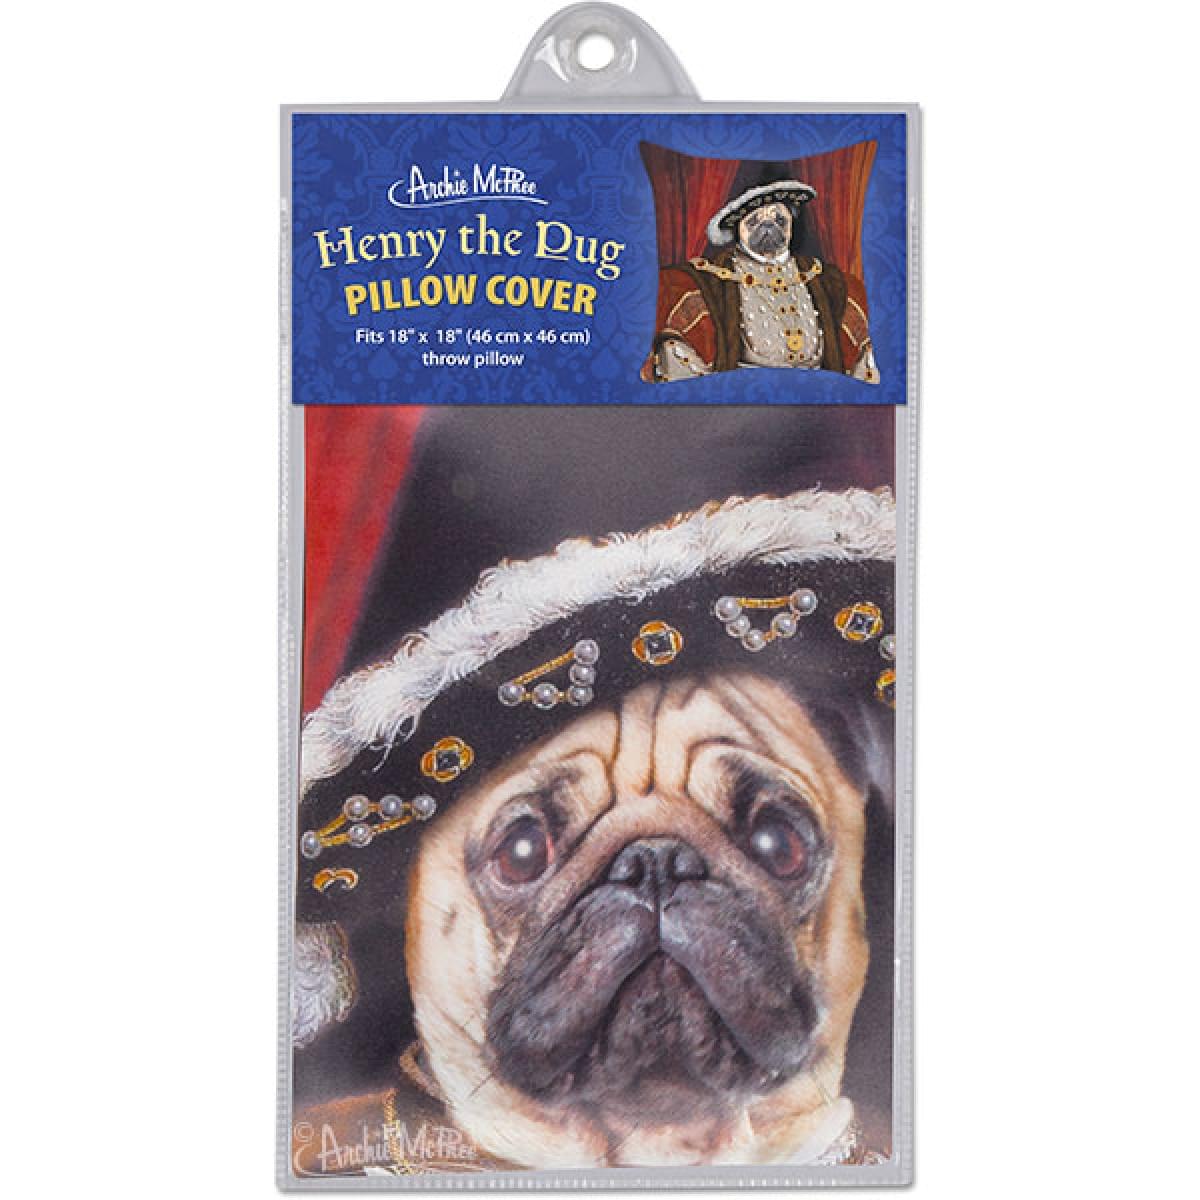 Henry the Pug 18"X 18" Pillow Cover